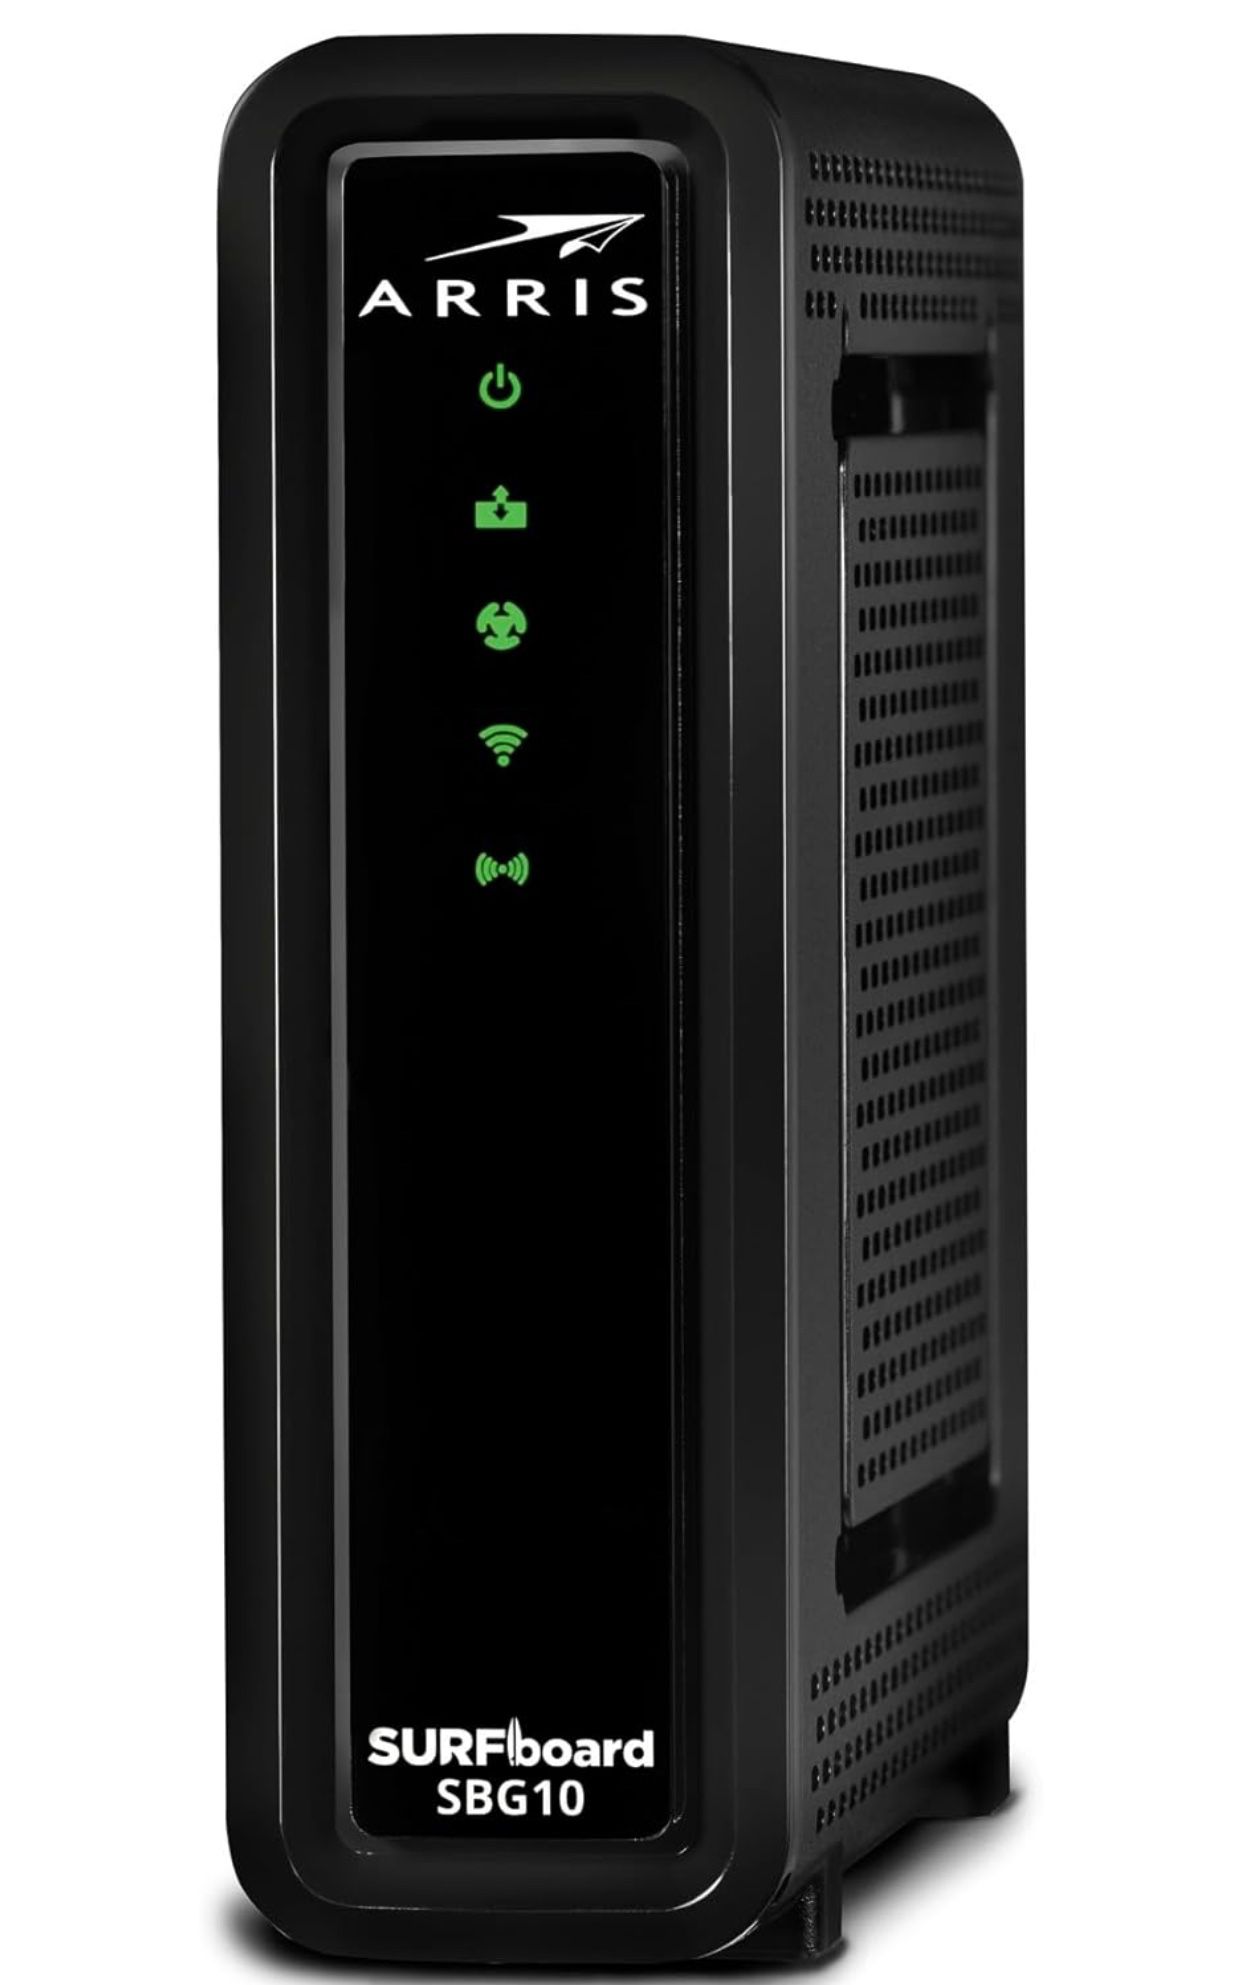 ARRIS Surfboard SBG10-RB DOCSIS 3.0 Cable Modem & AC1600 Dual Band Wi-Fi Router